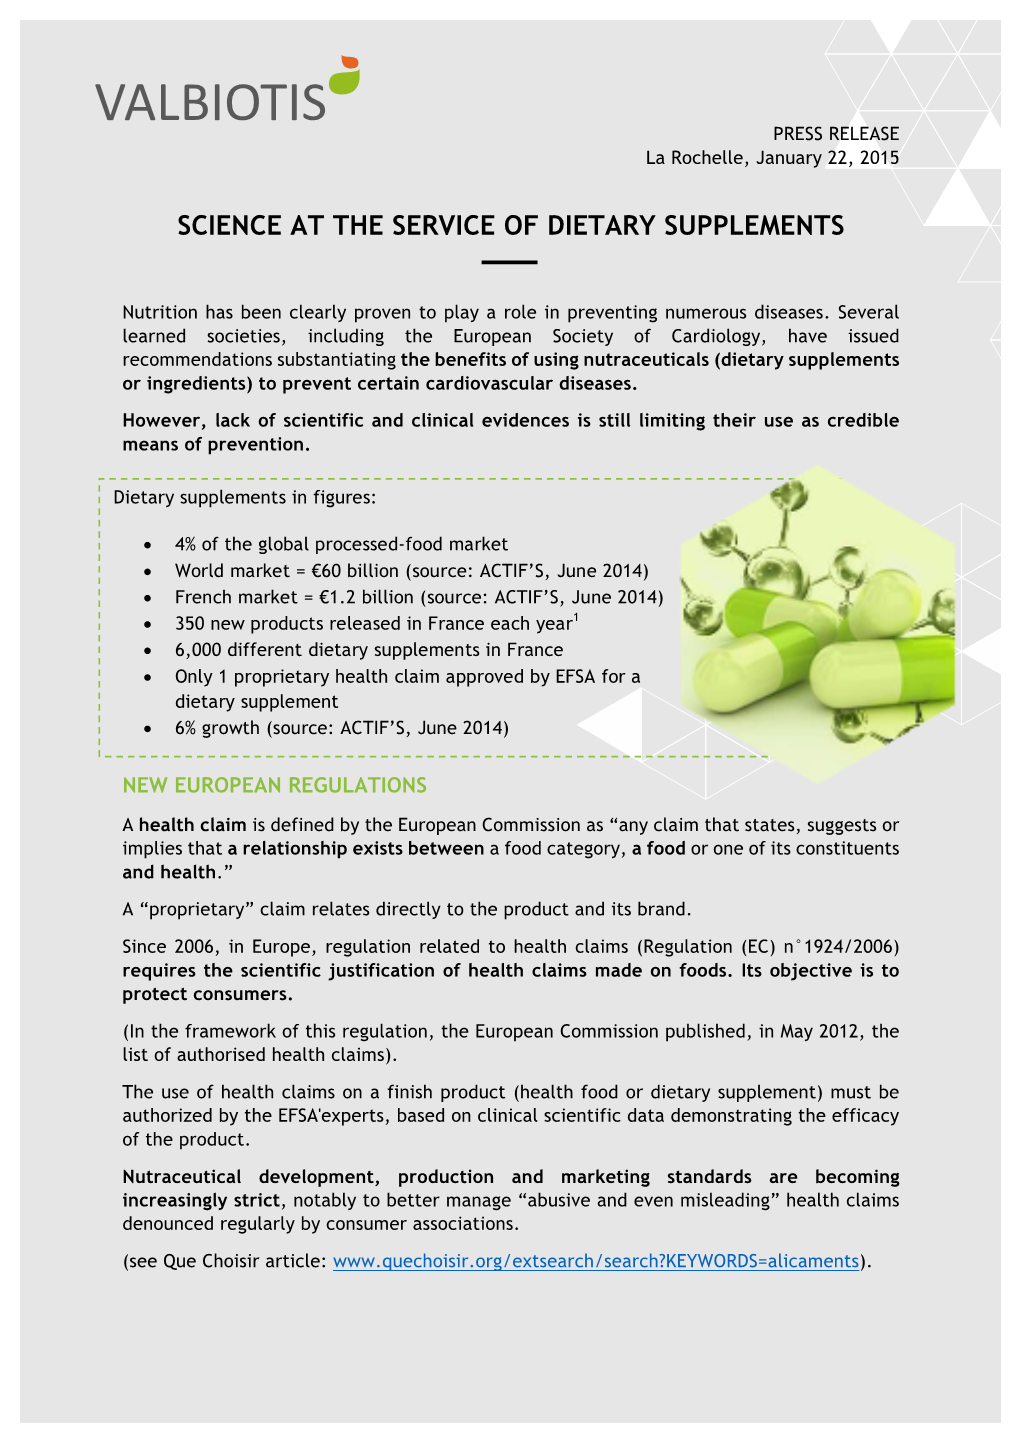 Science at the Service of Dietary Supplements